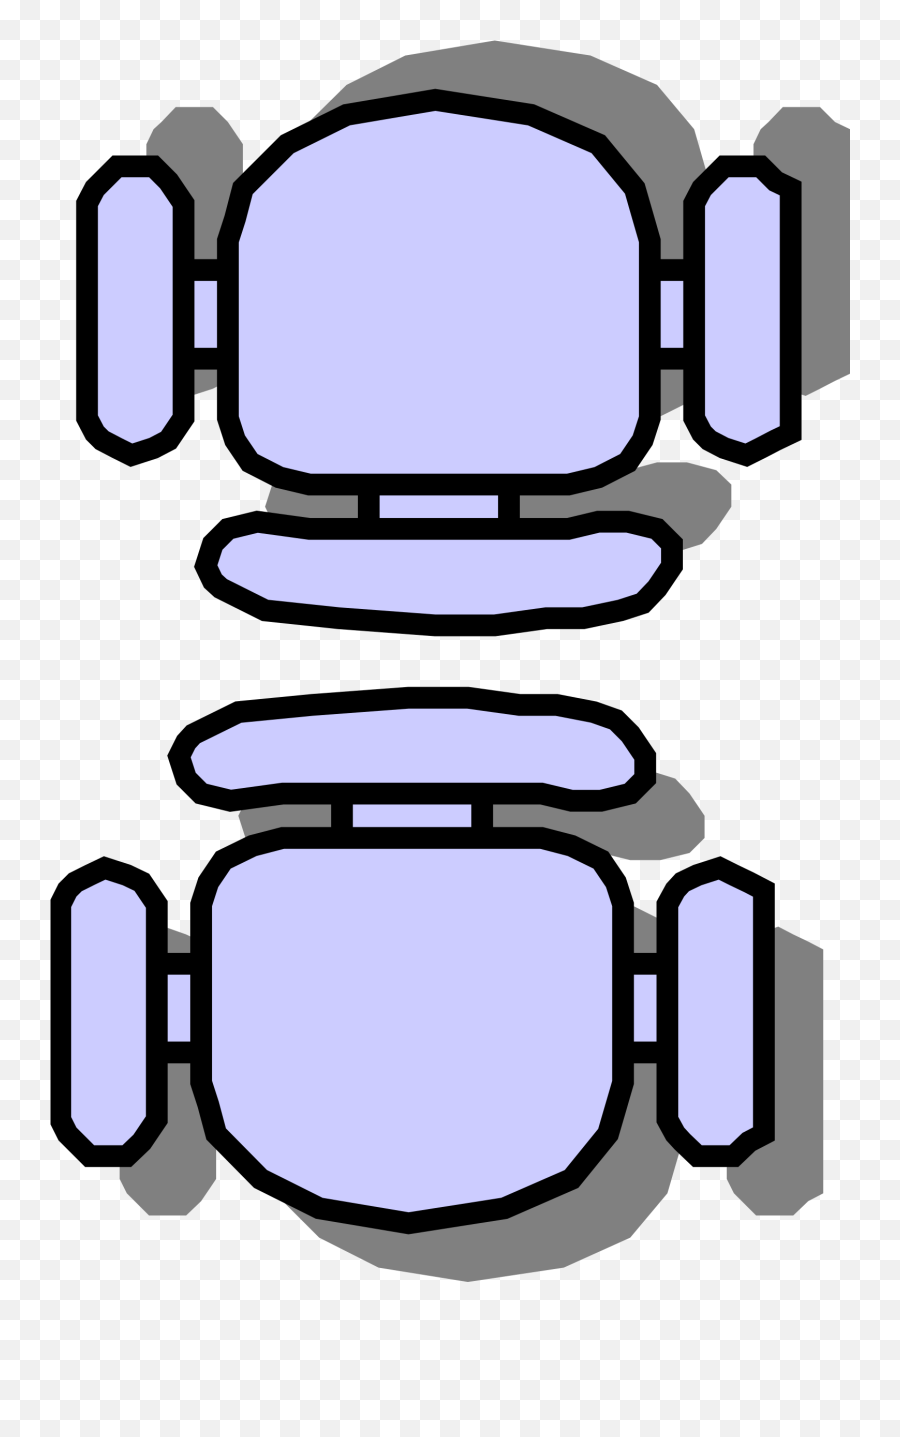 This Free Icons Png Design Of Classroom - Chair For Office Layout,Classroom Png